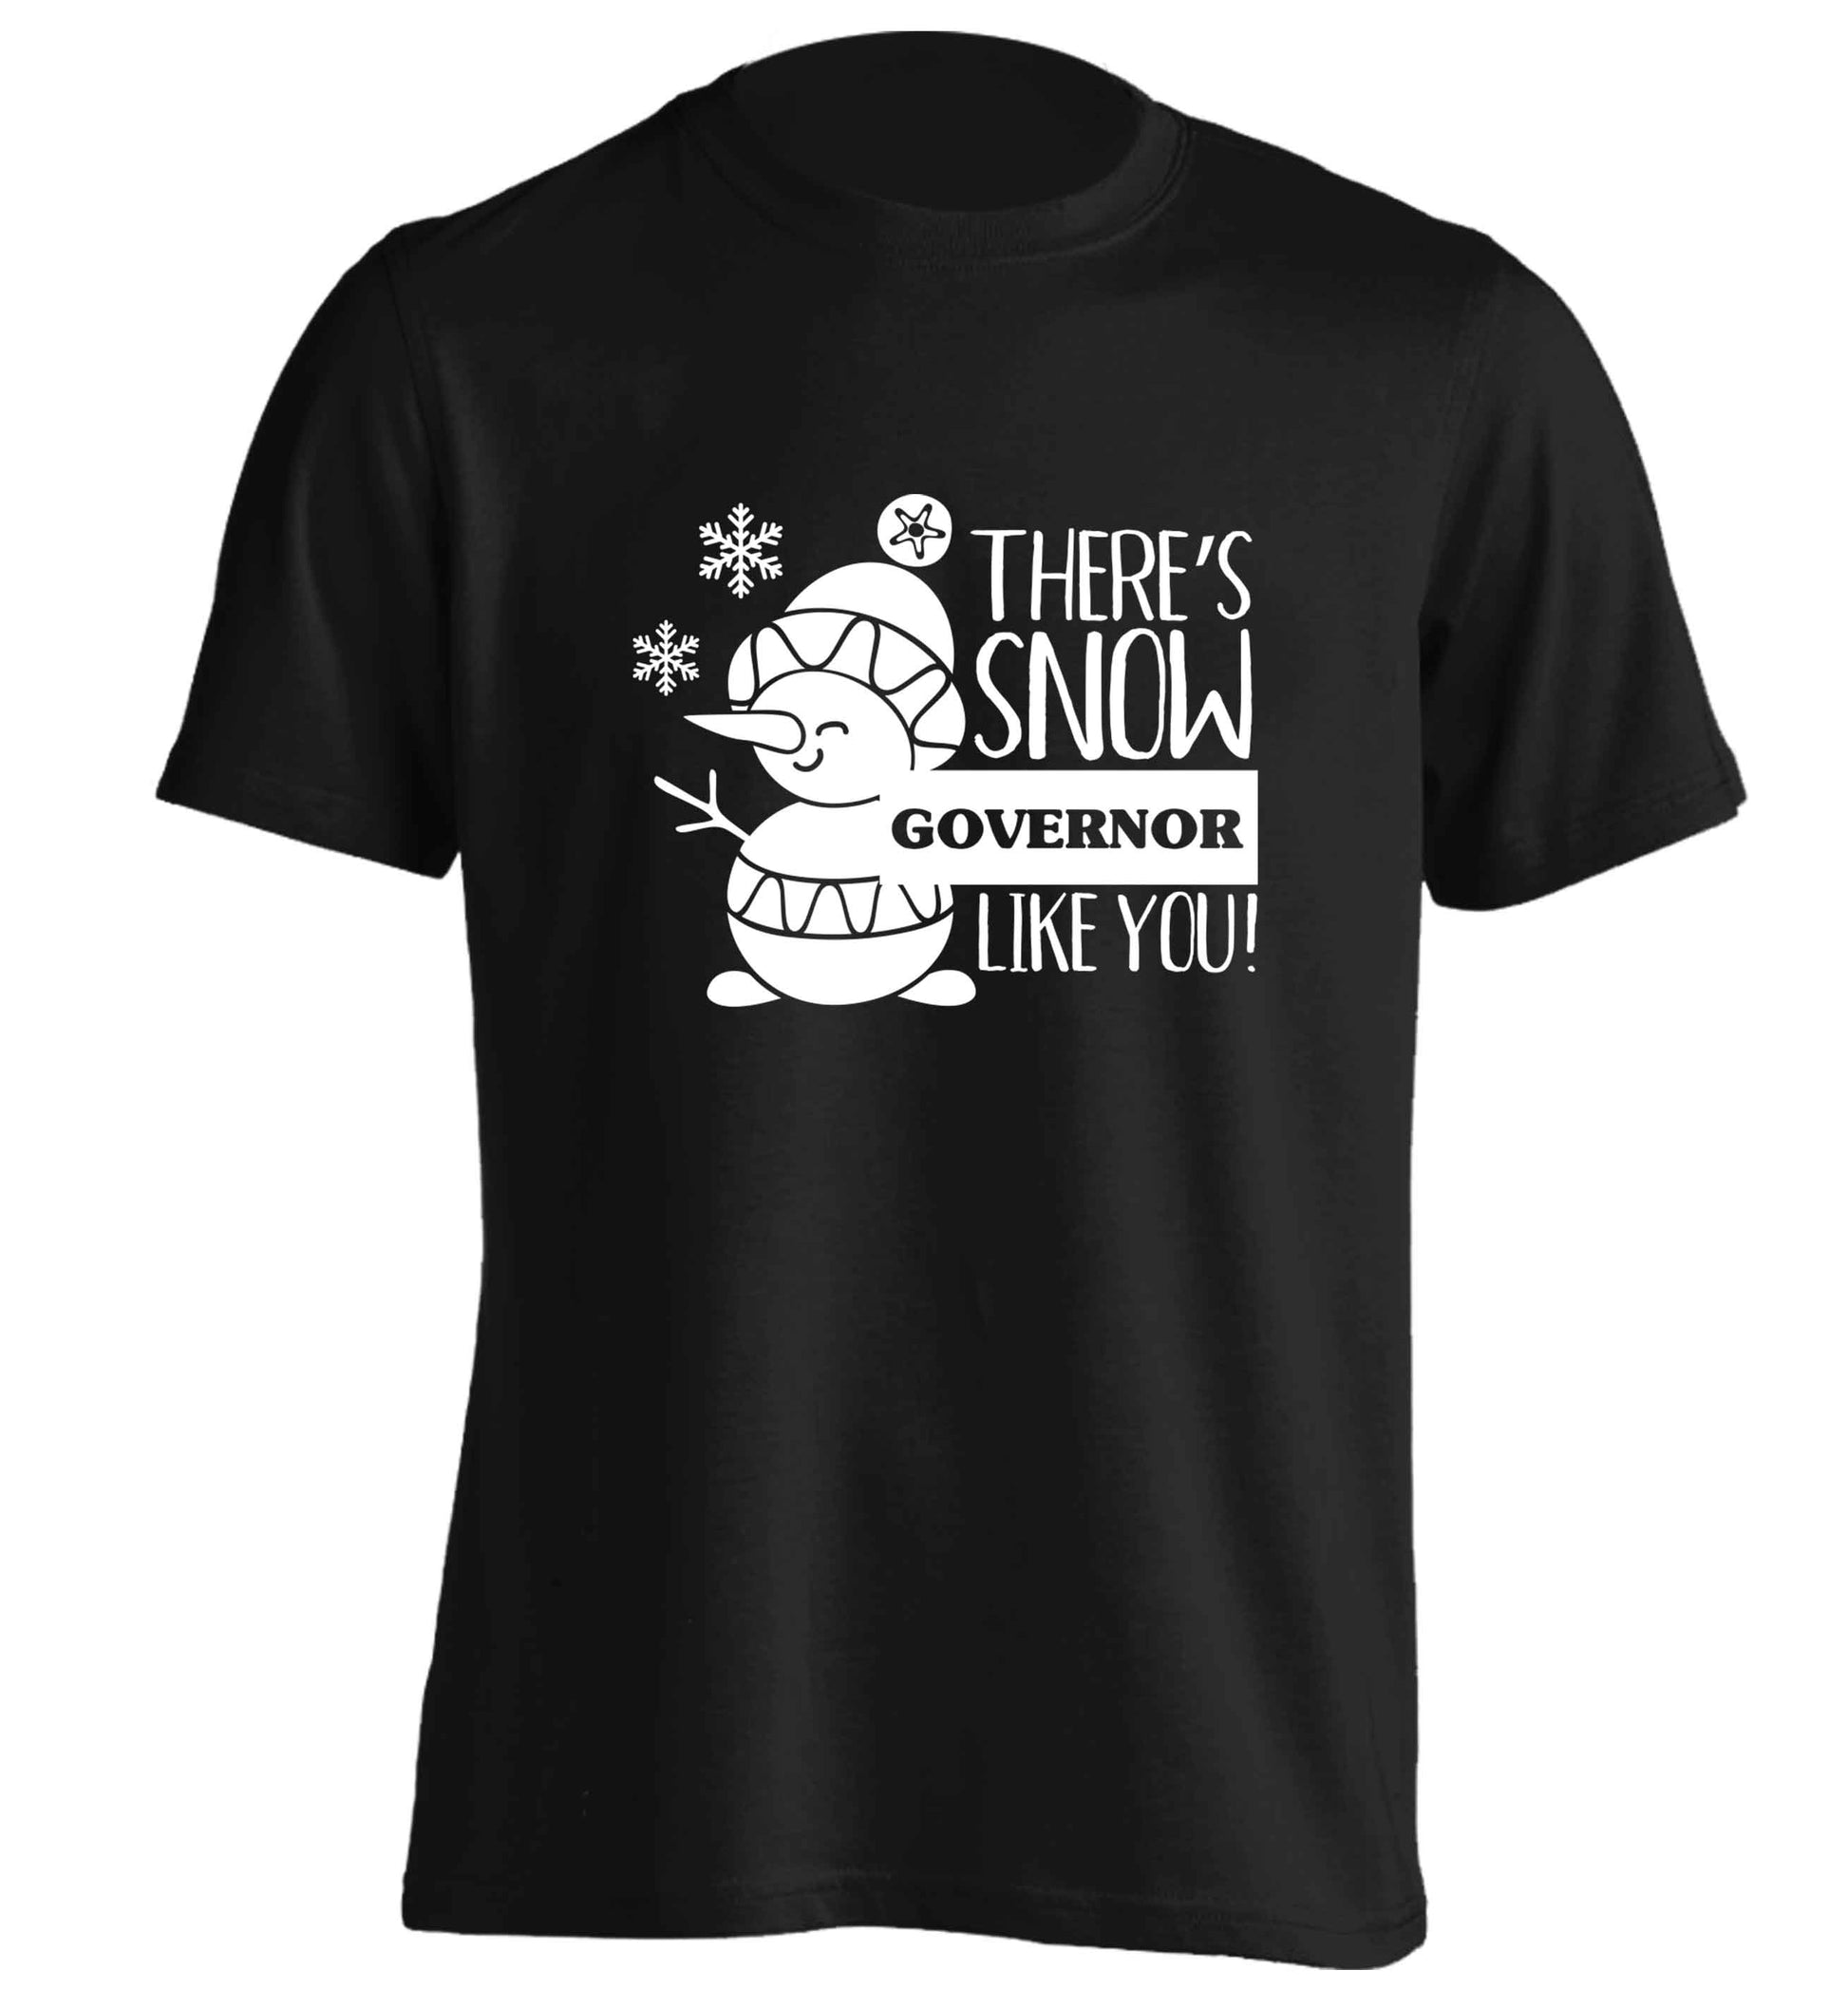 There's snow governor like you adults unisex black Tshirt 2XL